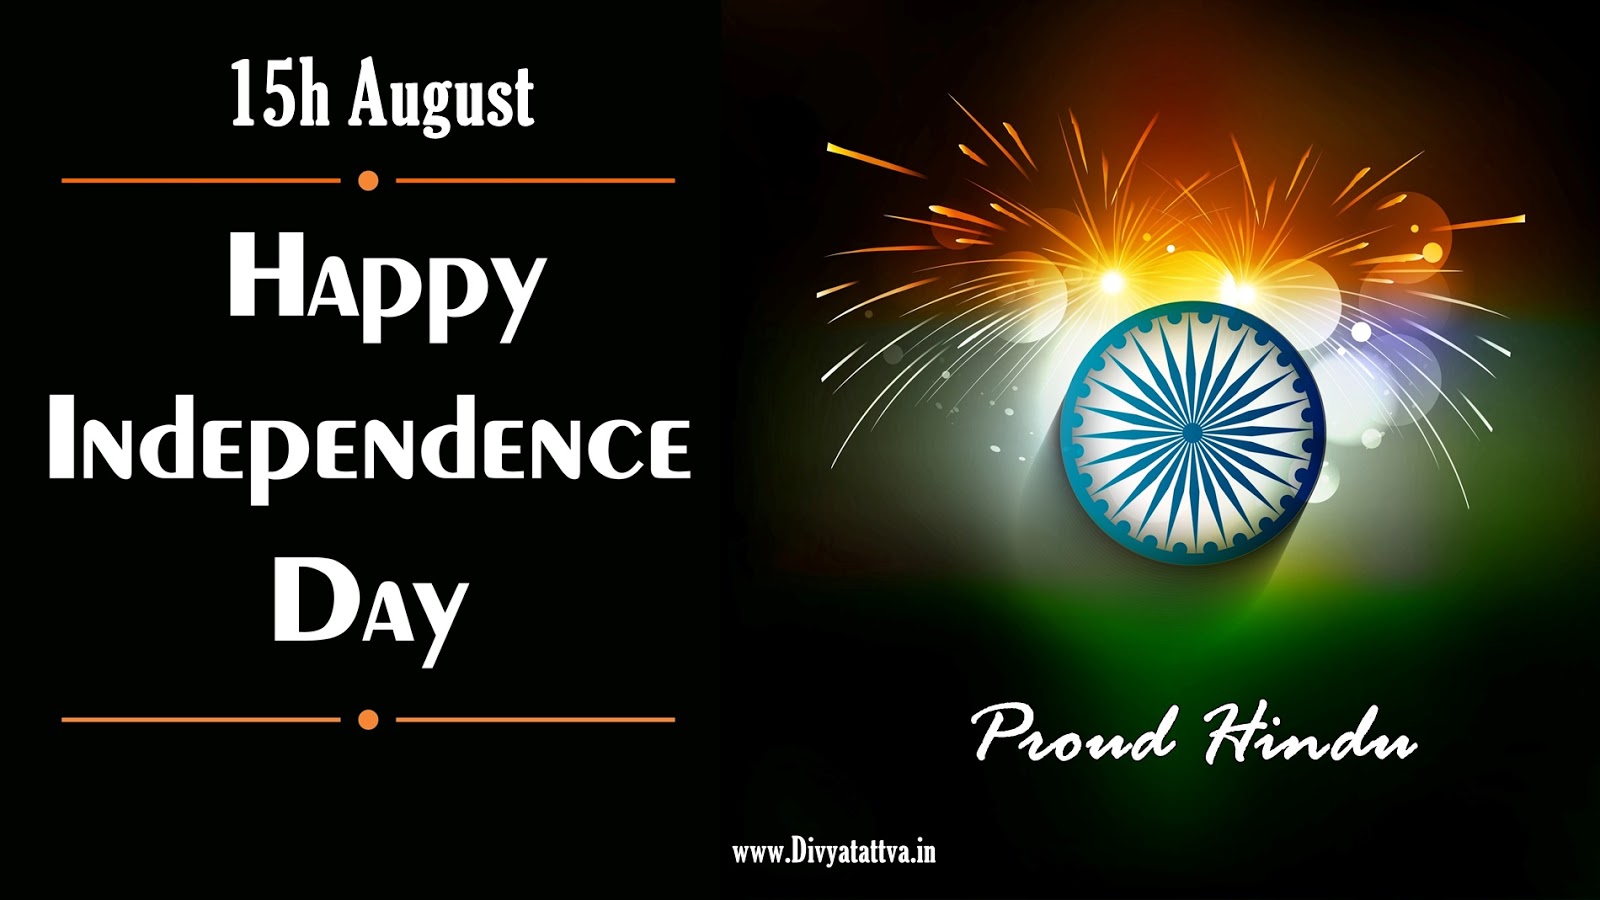 Happy Independece Day 15th August India Wallpapers Pictures Images